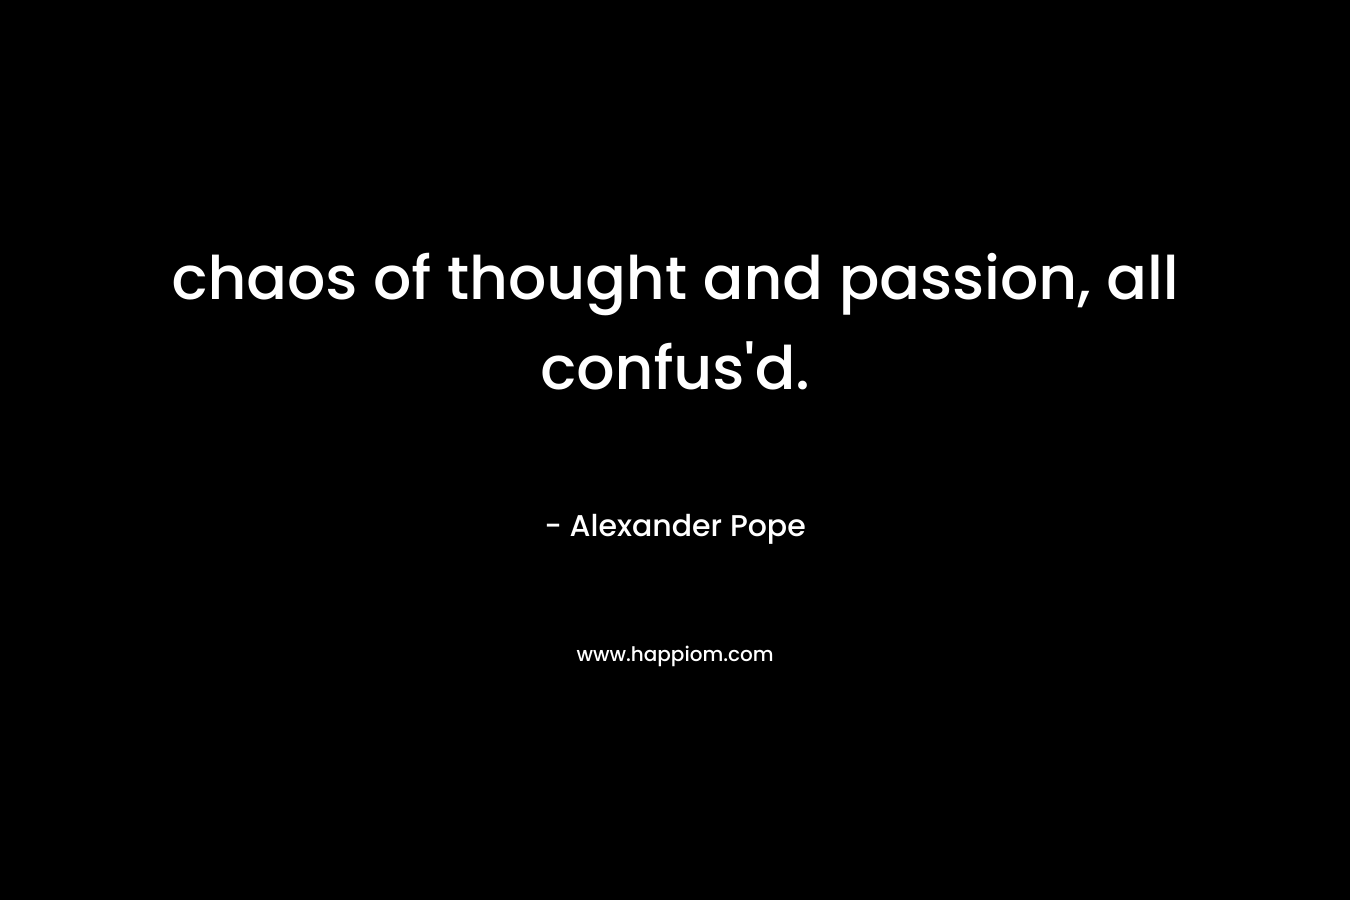 chaos of thought and passion, all confus'd.